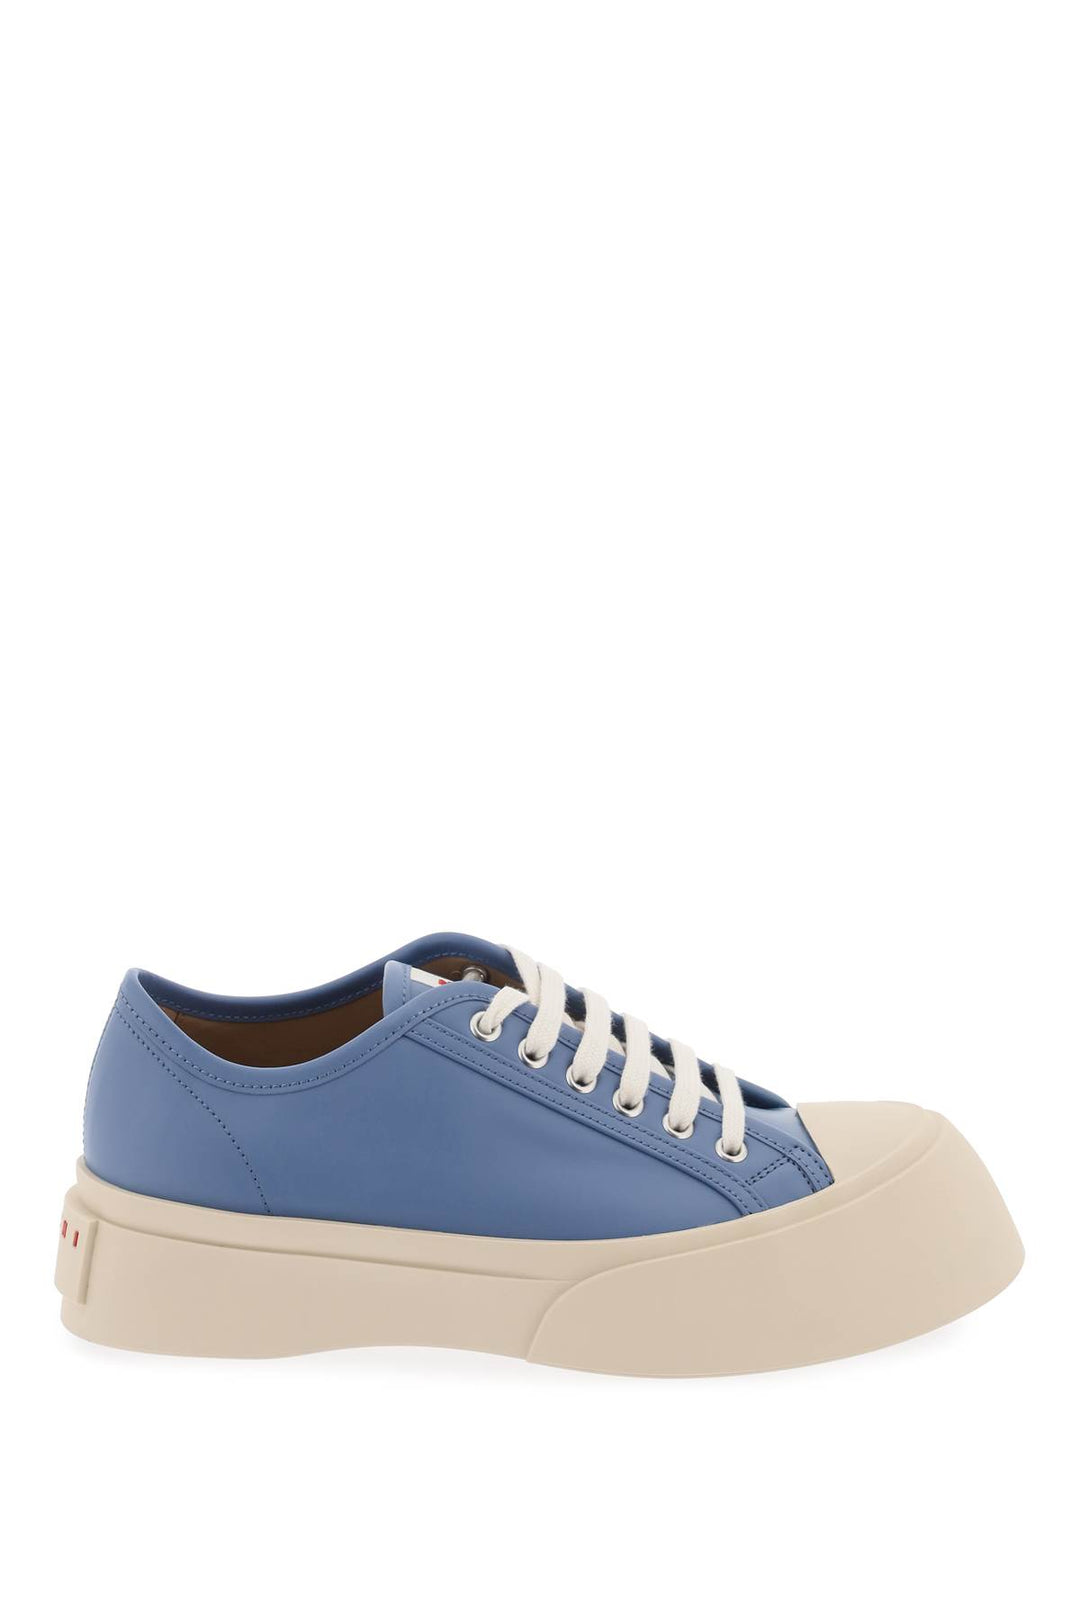 Marni leather pablo sneakers-0